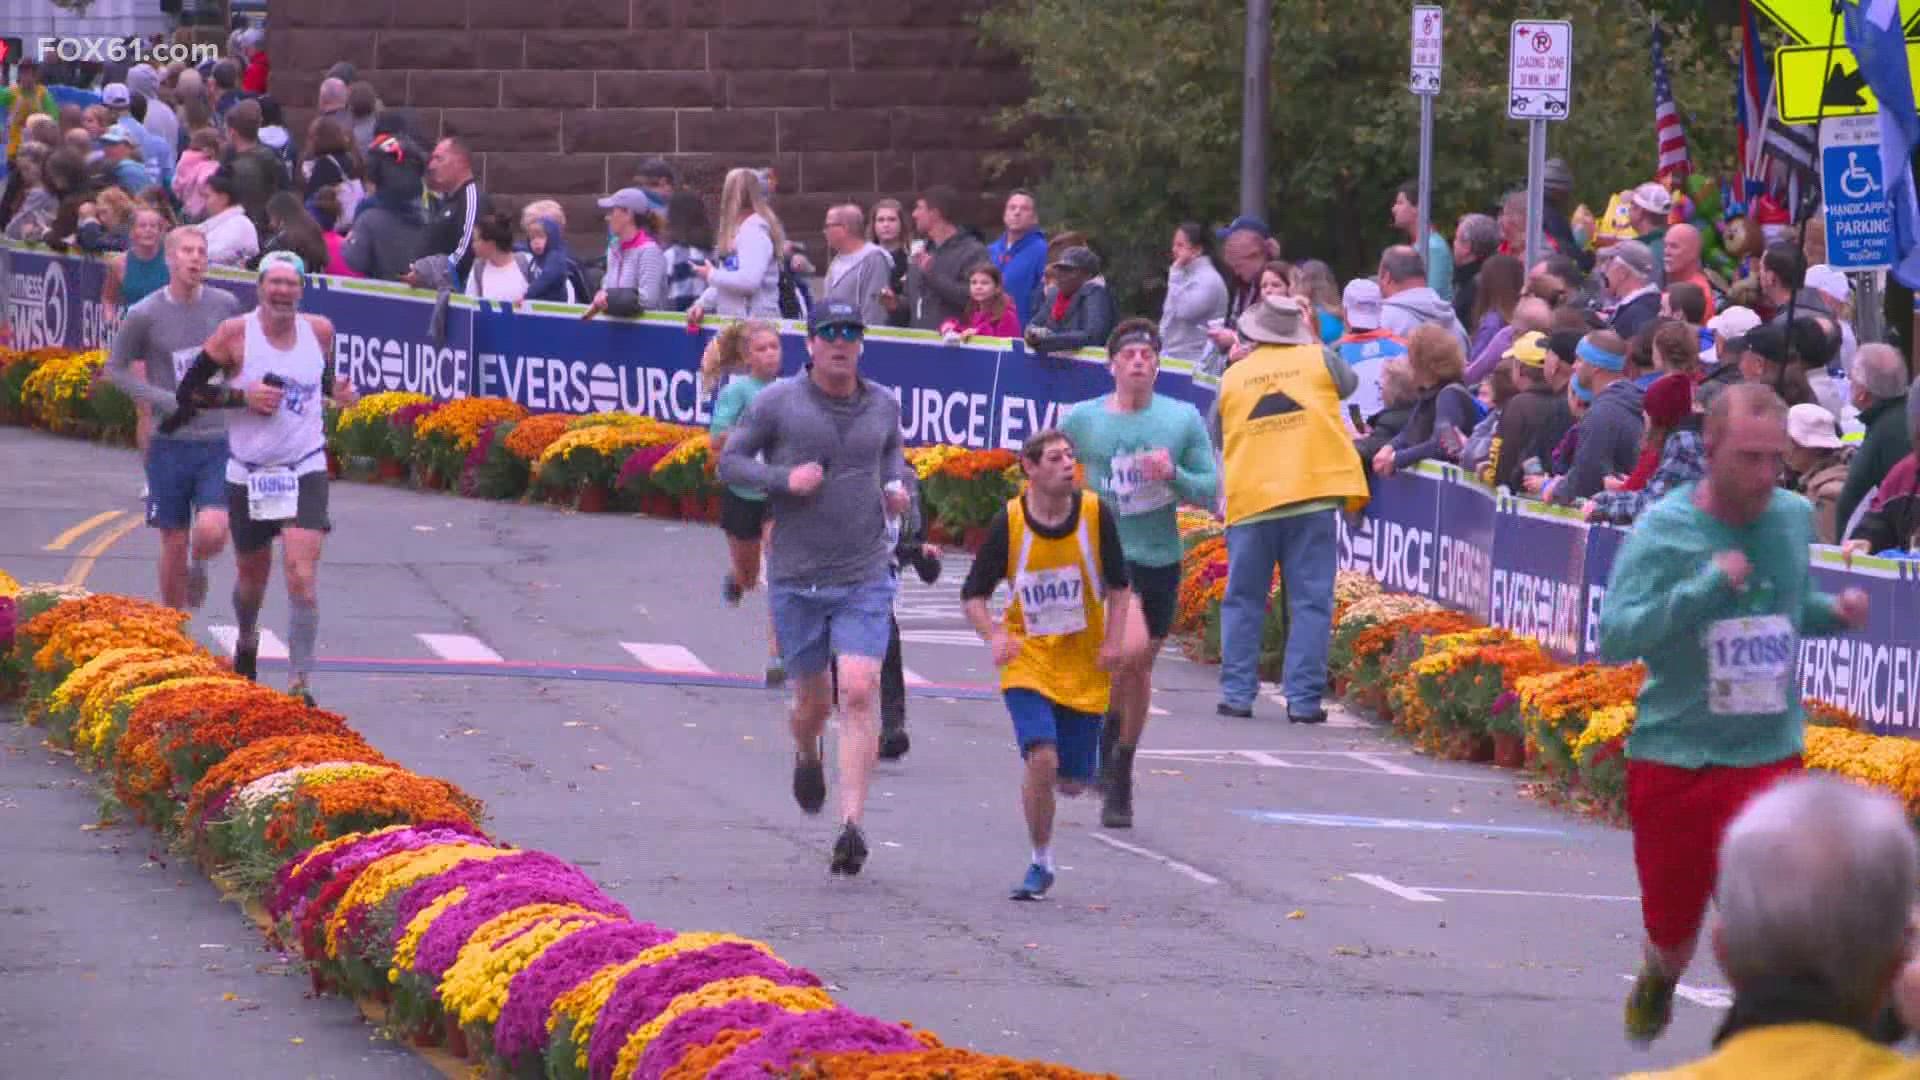 About 7,000 runners are expected to head to the capital city Saturday for the race